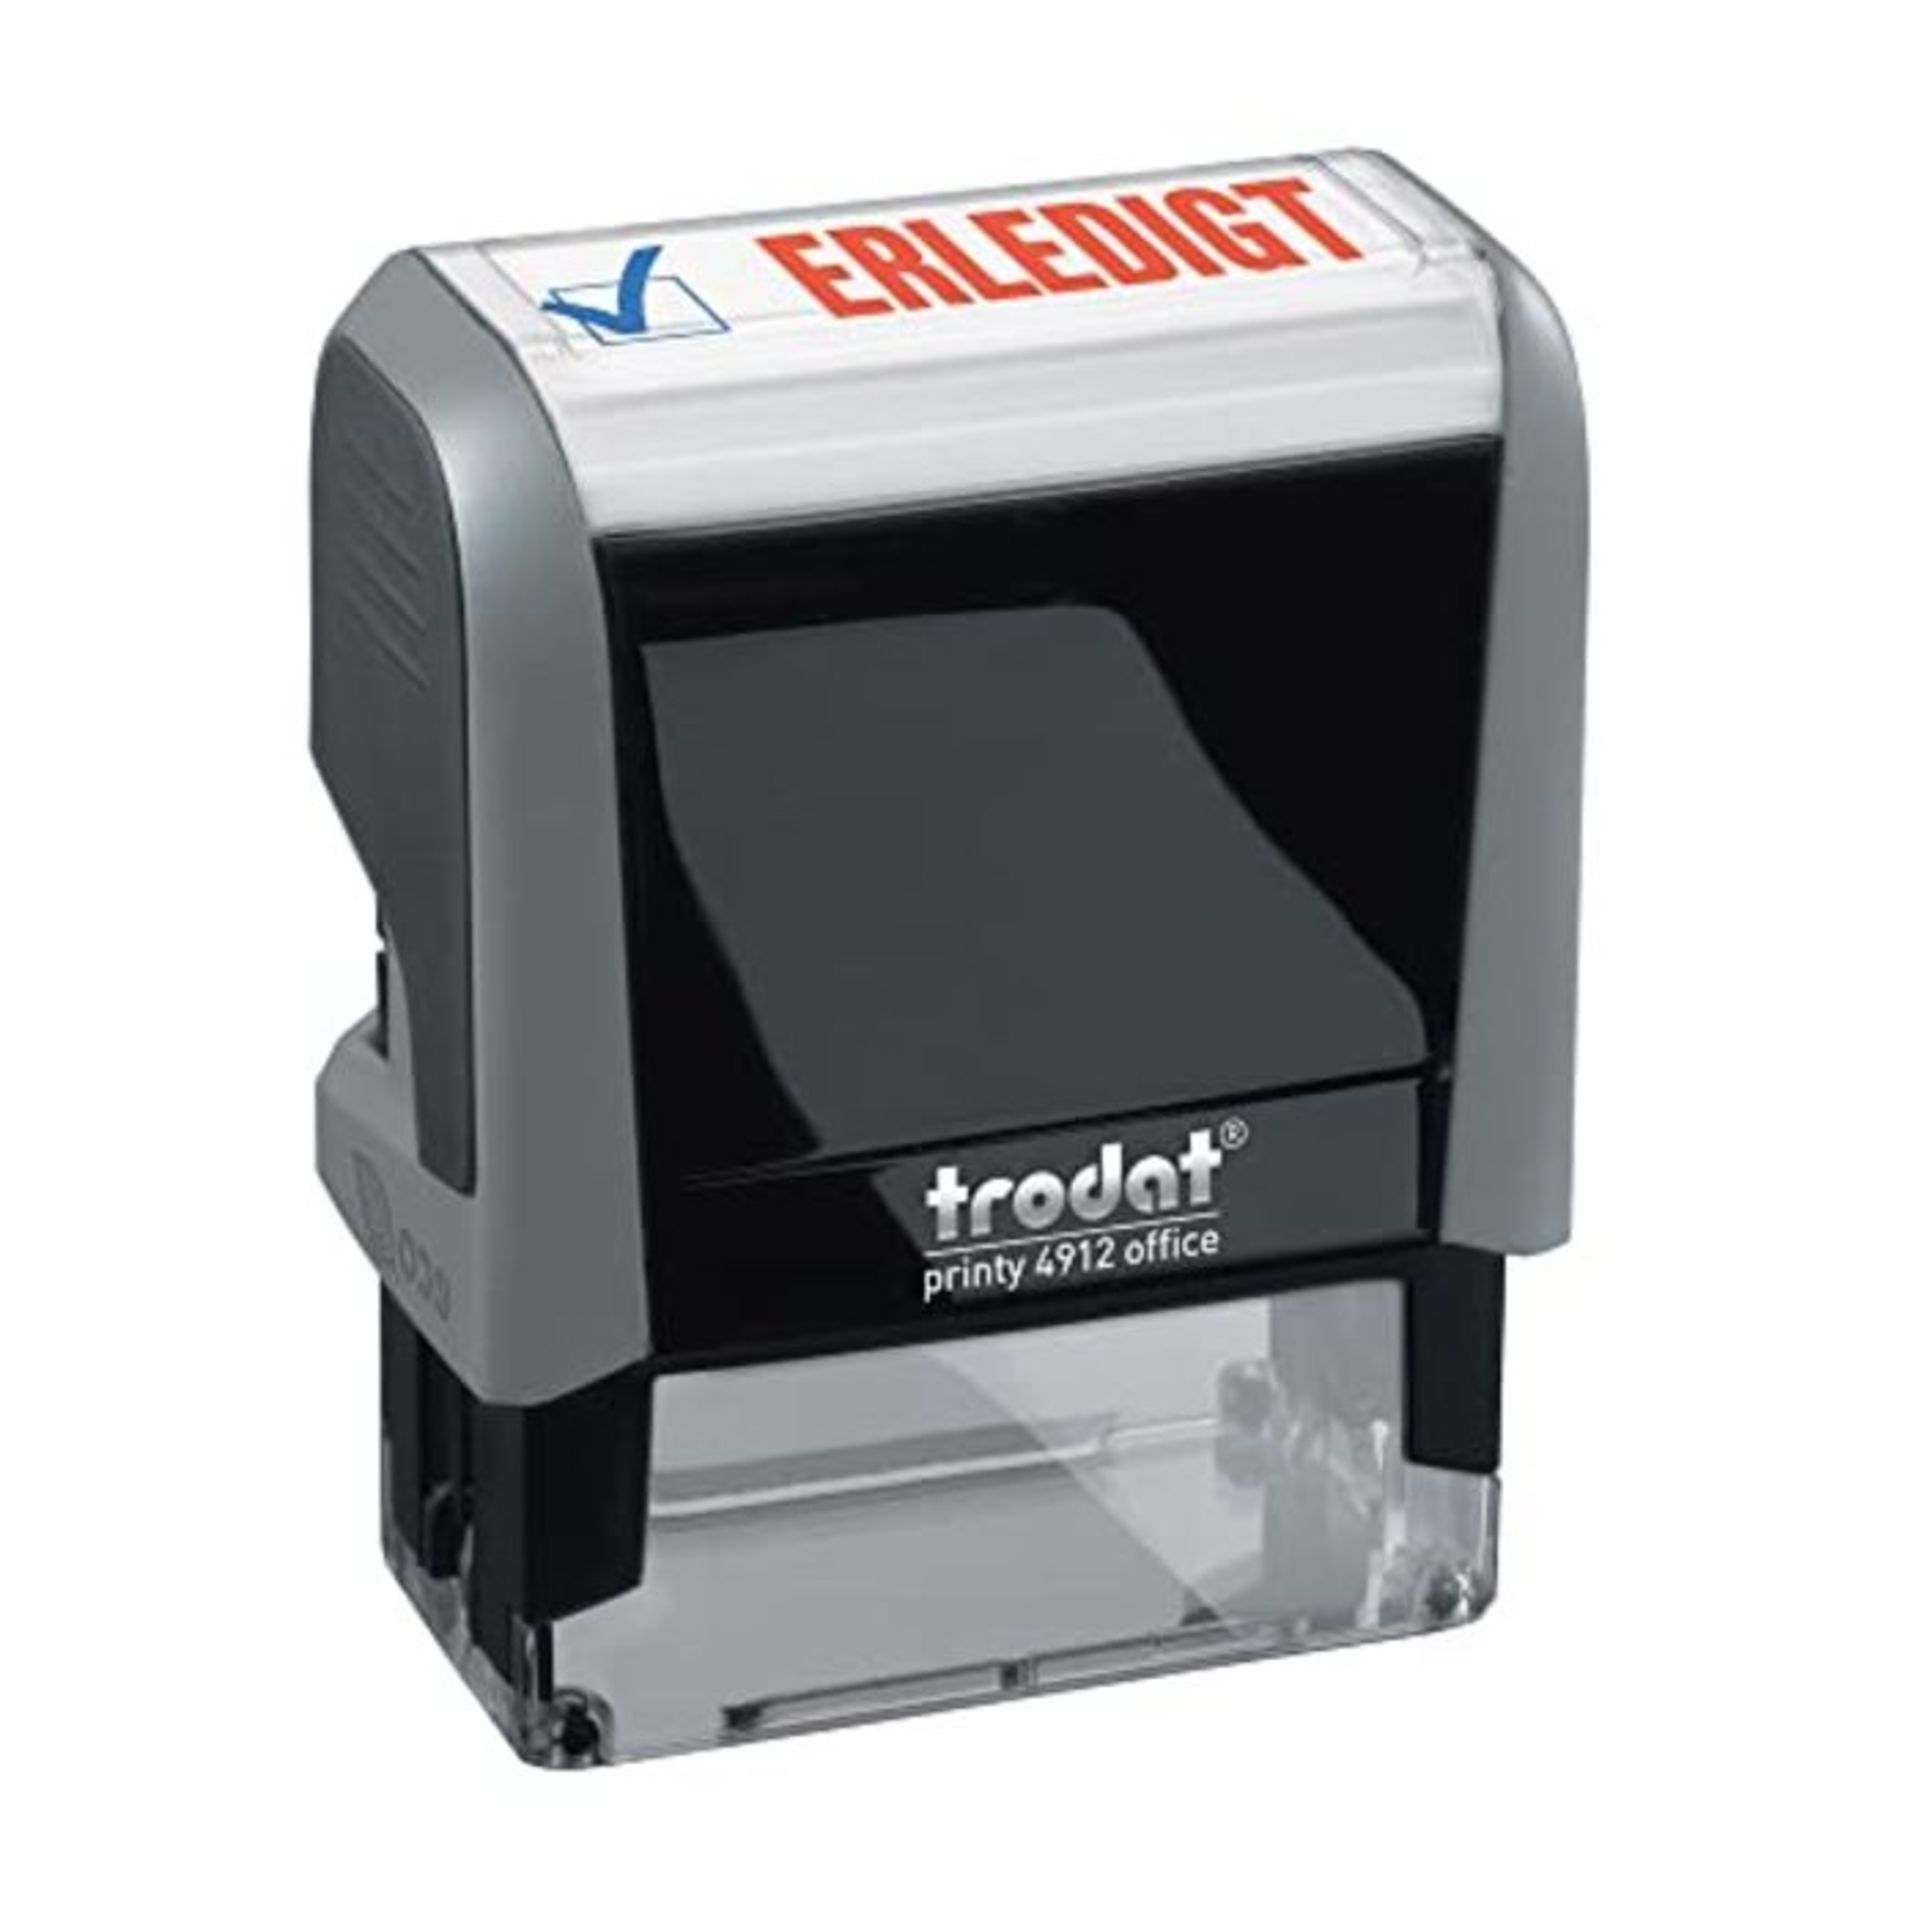 Trodat Office Printy 4912 Stamp 'Erledigt' (Completed) Ready-for-Use - Grey [German La